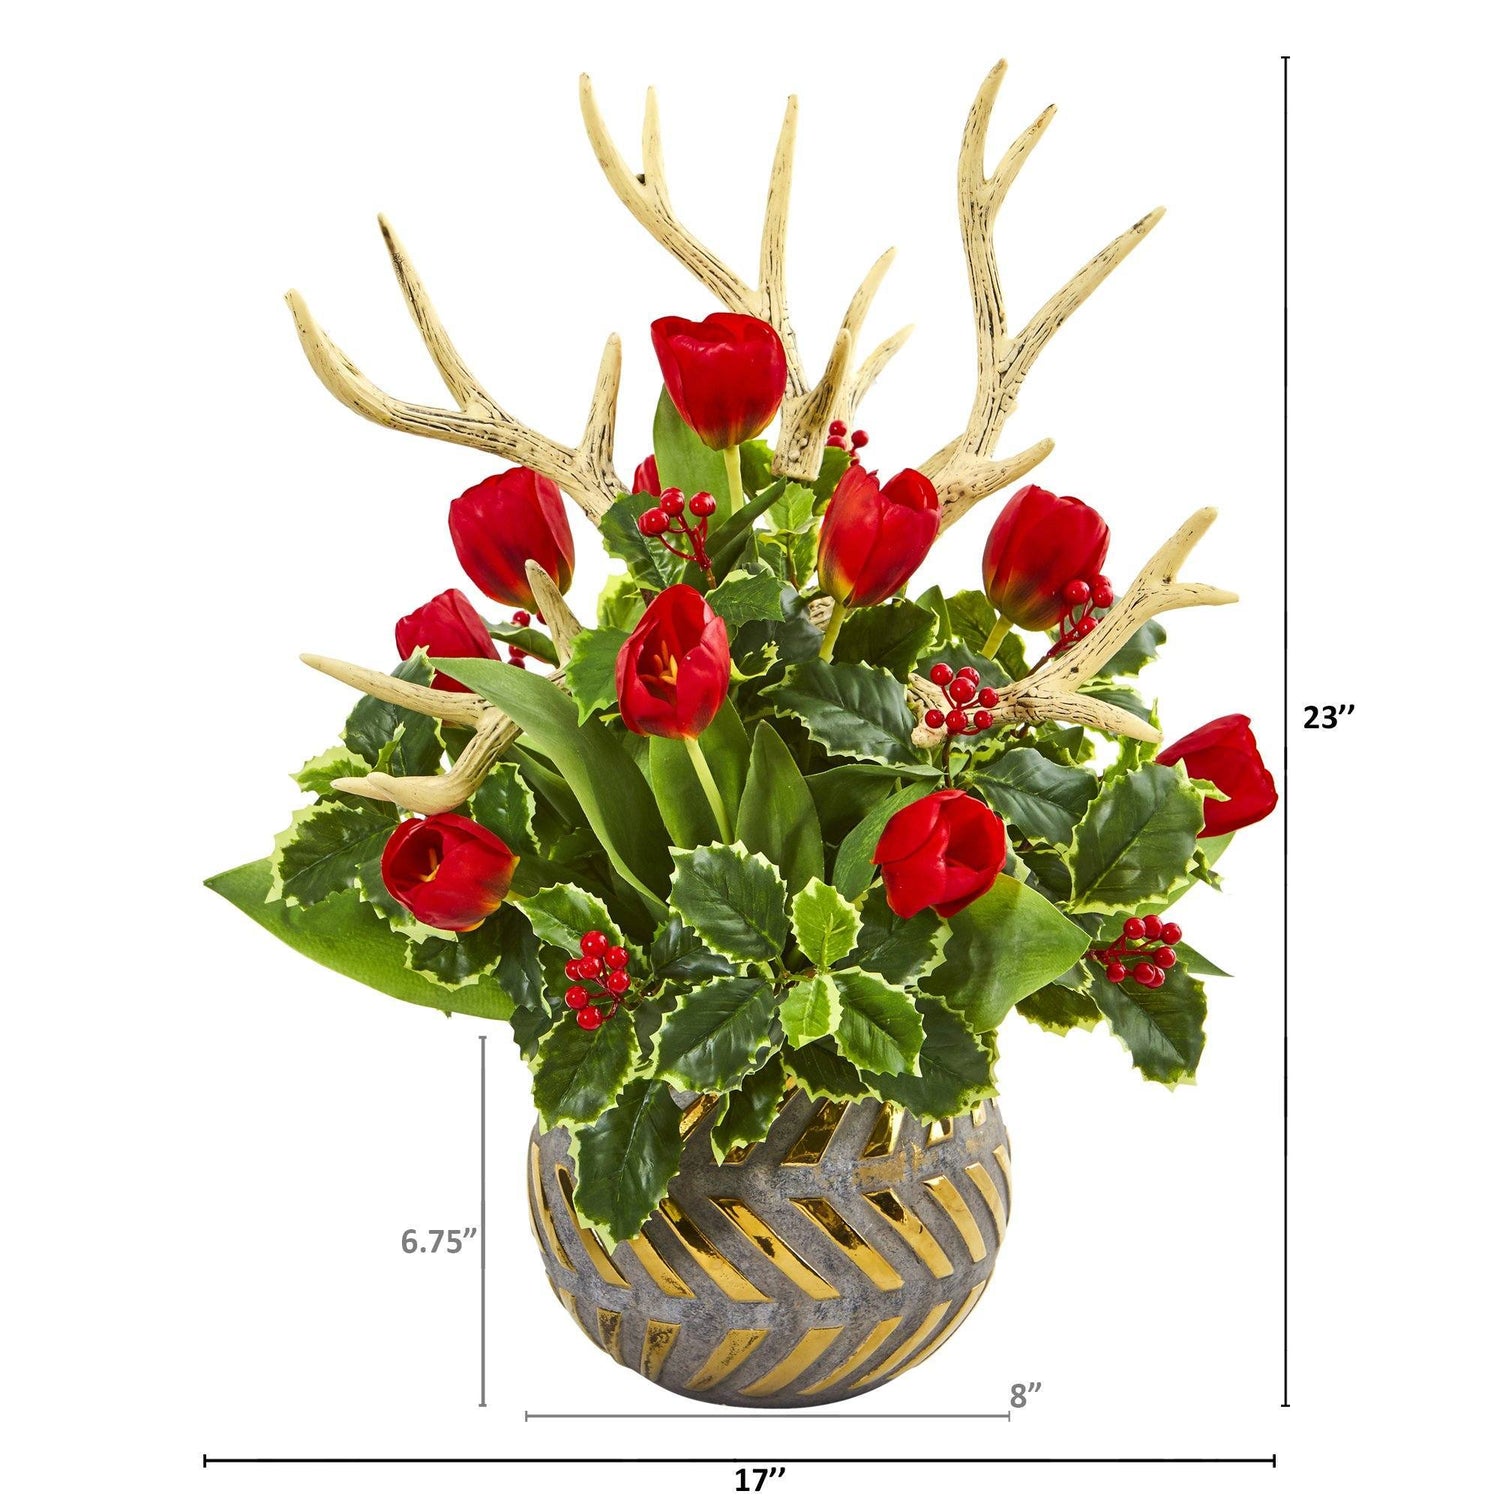 23” Tulips, Antlers and Holly Leaf Arrangement in Bowl